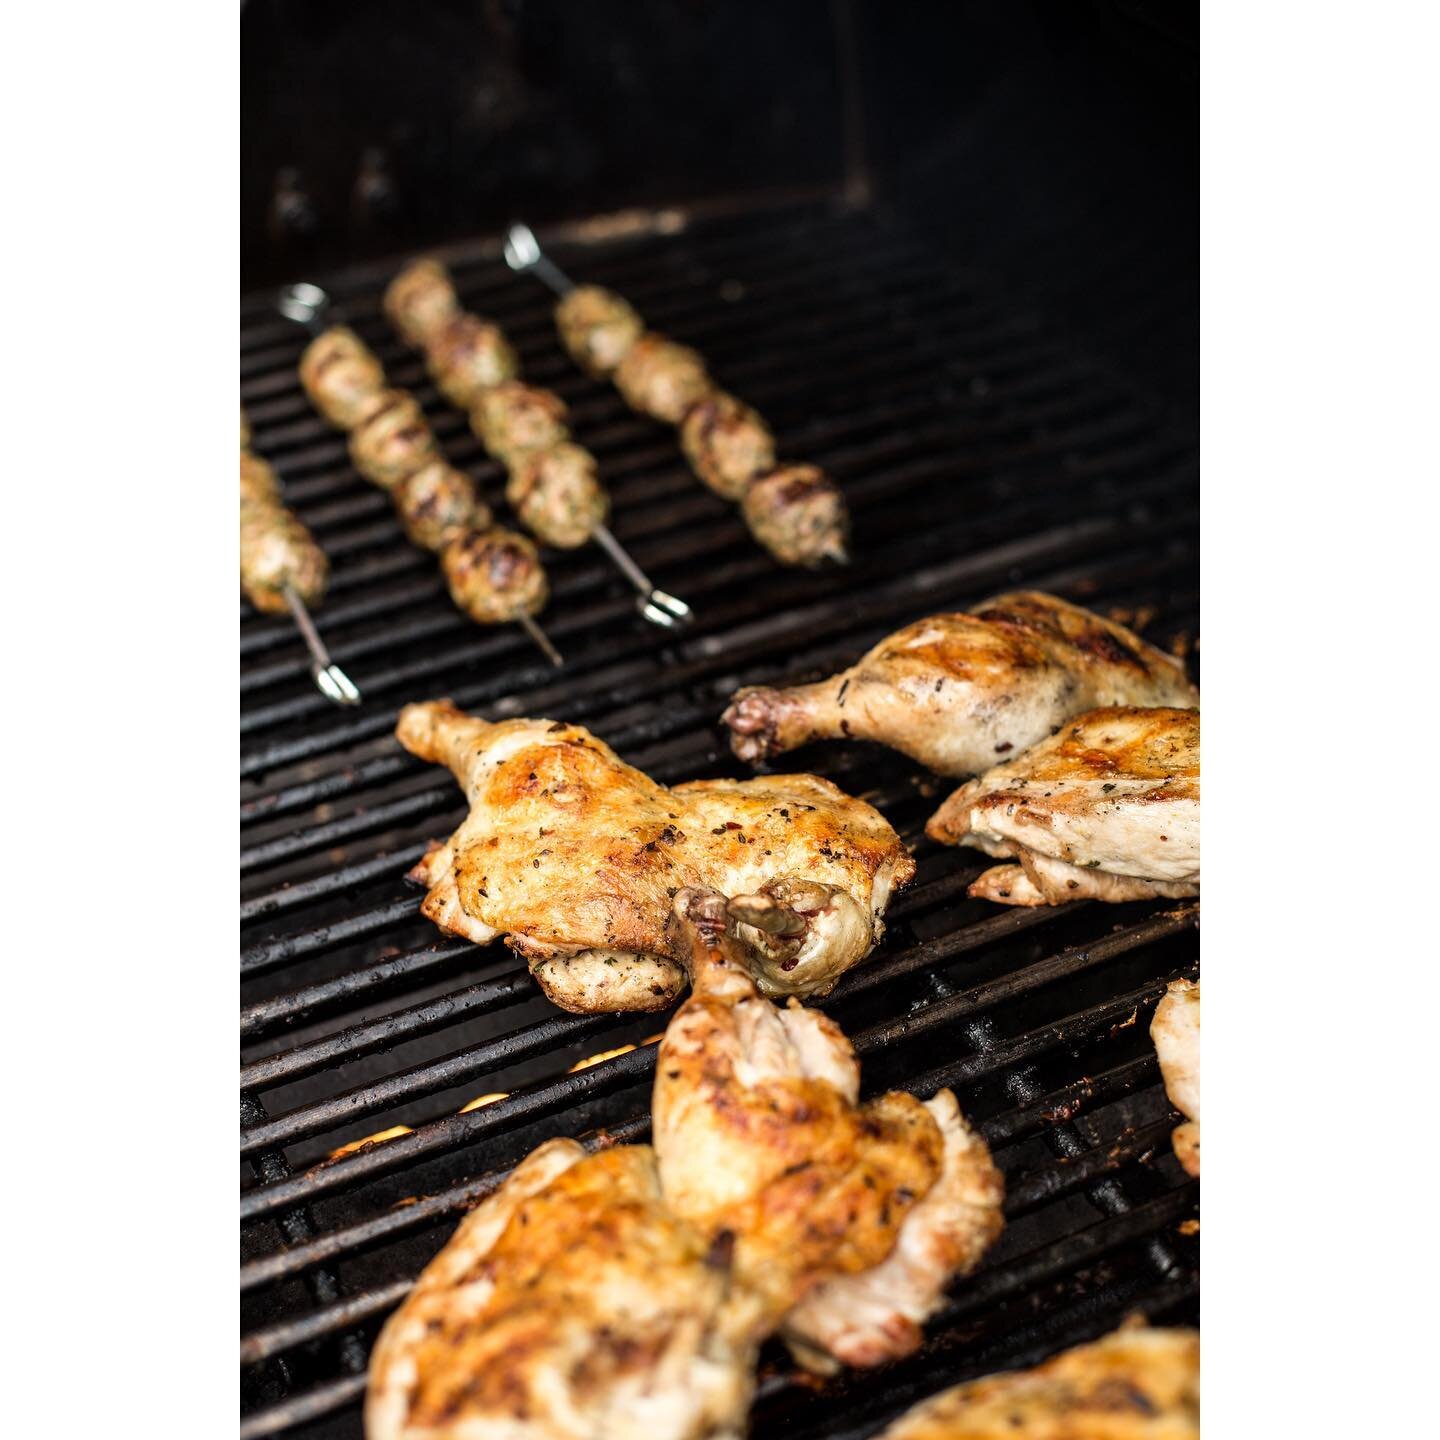 Celebrating the (un)official last day of summer by the grill. Grilled chicken + lamb kefta skewers ✨🍗 
.
.
.
#laborday #grilling #labordayweekend #privatechef #catering #bryanjonescatering #sonomacounty #sonoma